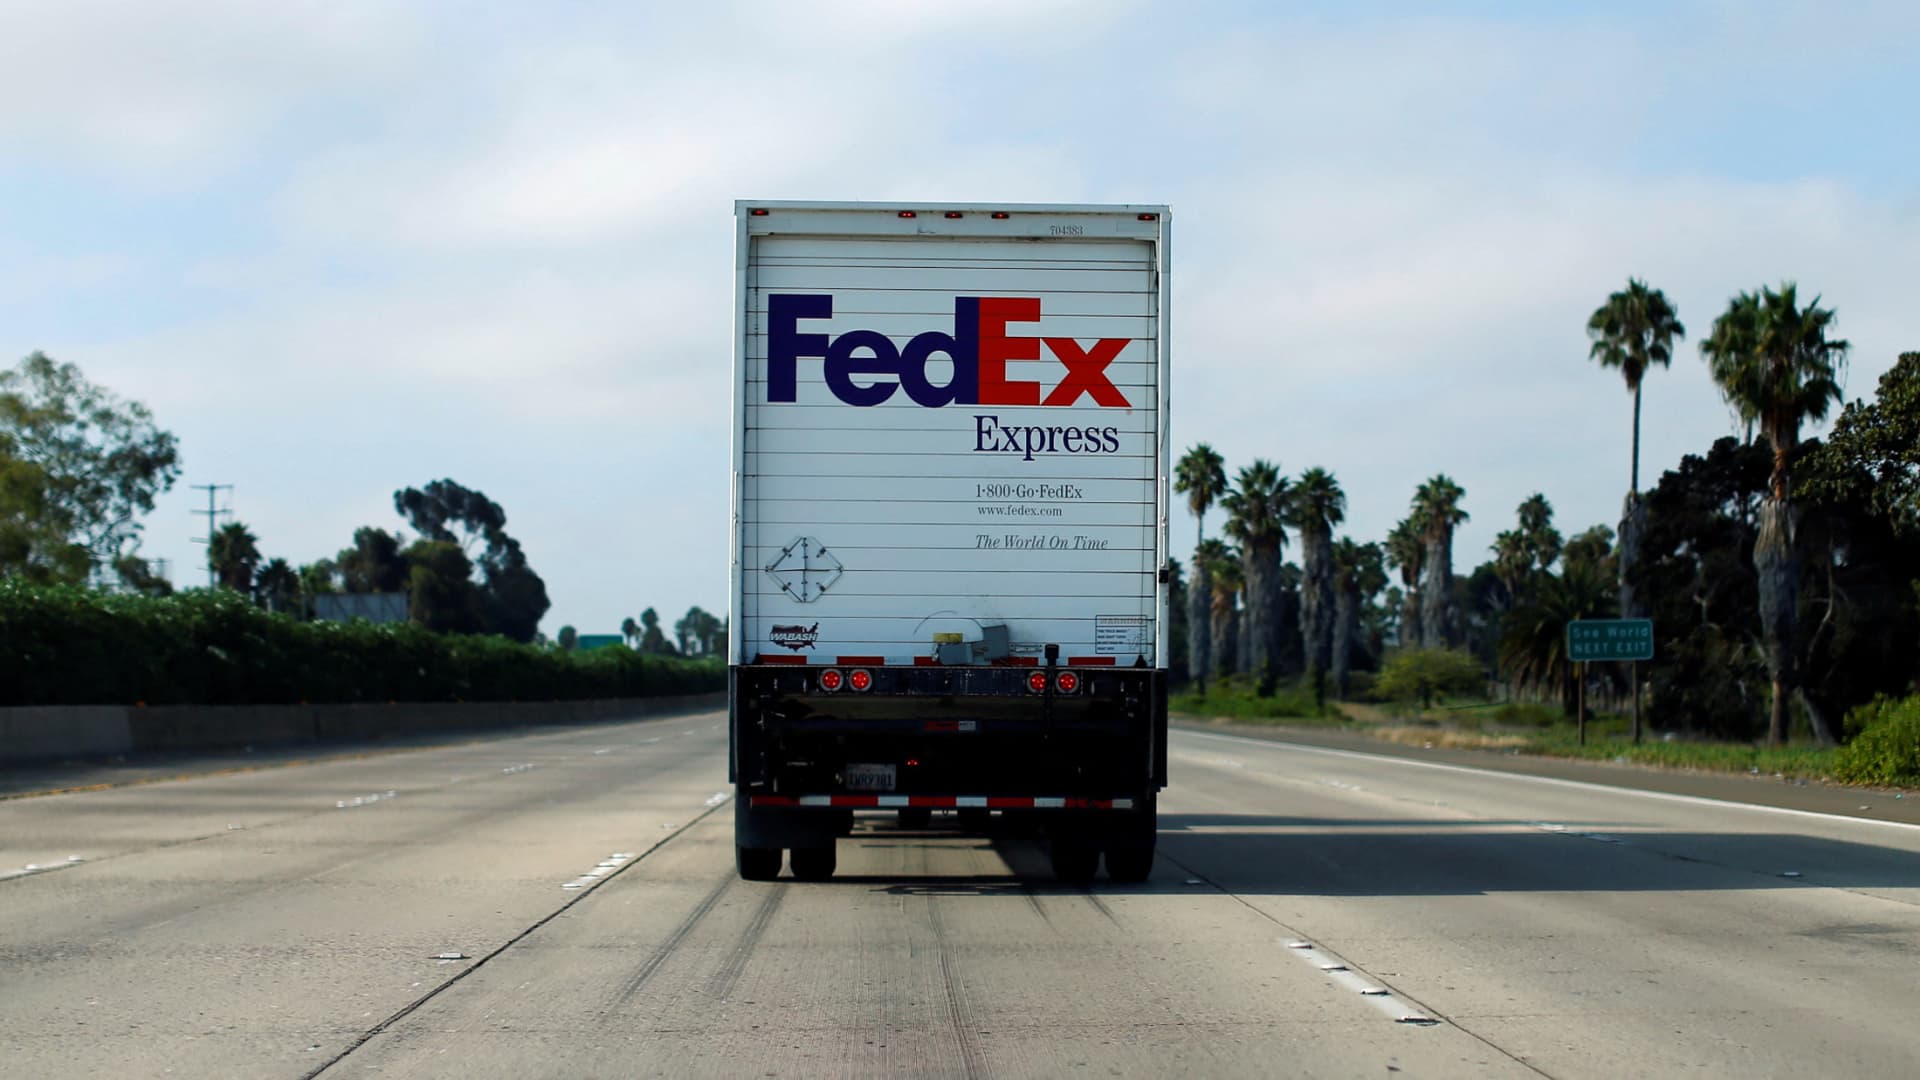 A Federal Express truck makes its way down a freeway in San Diego, California.